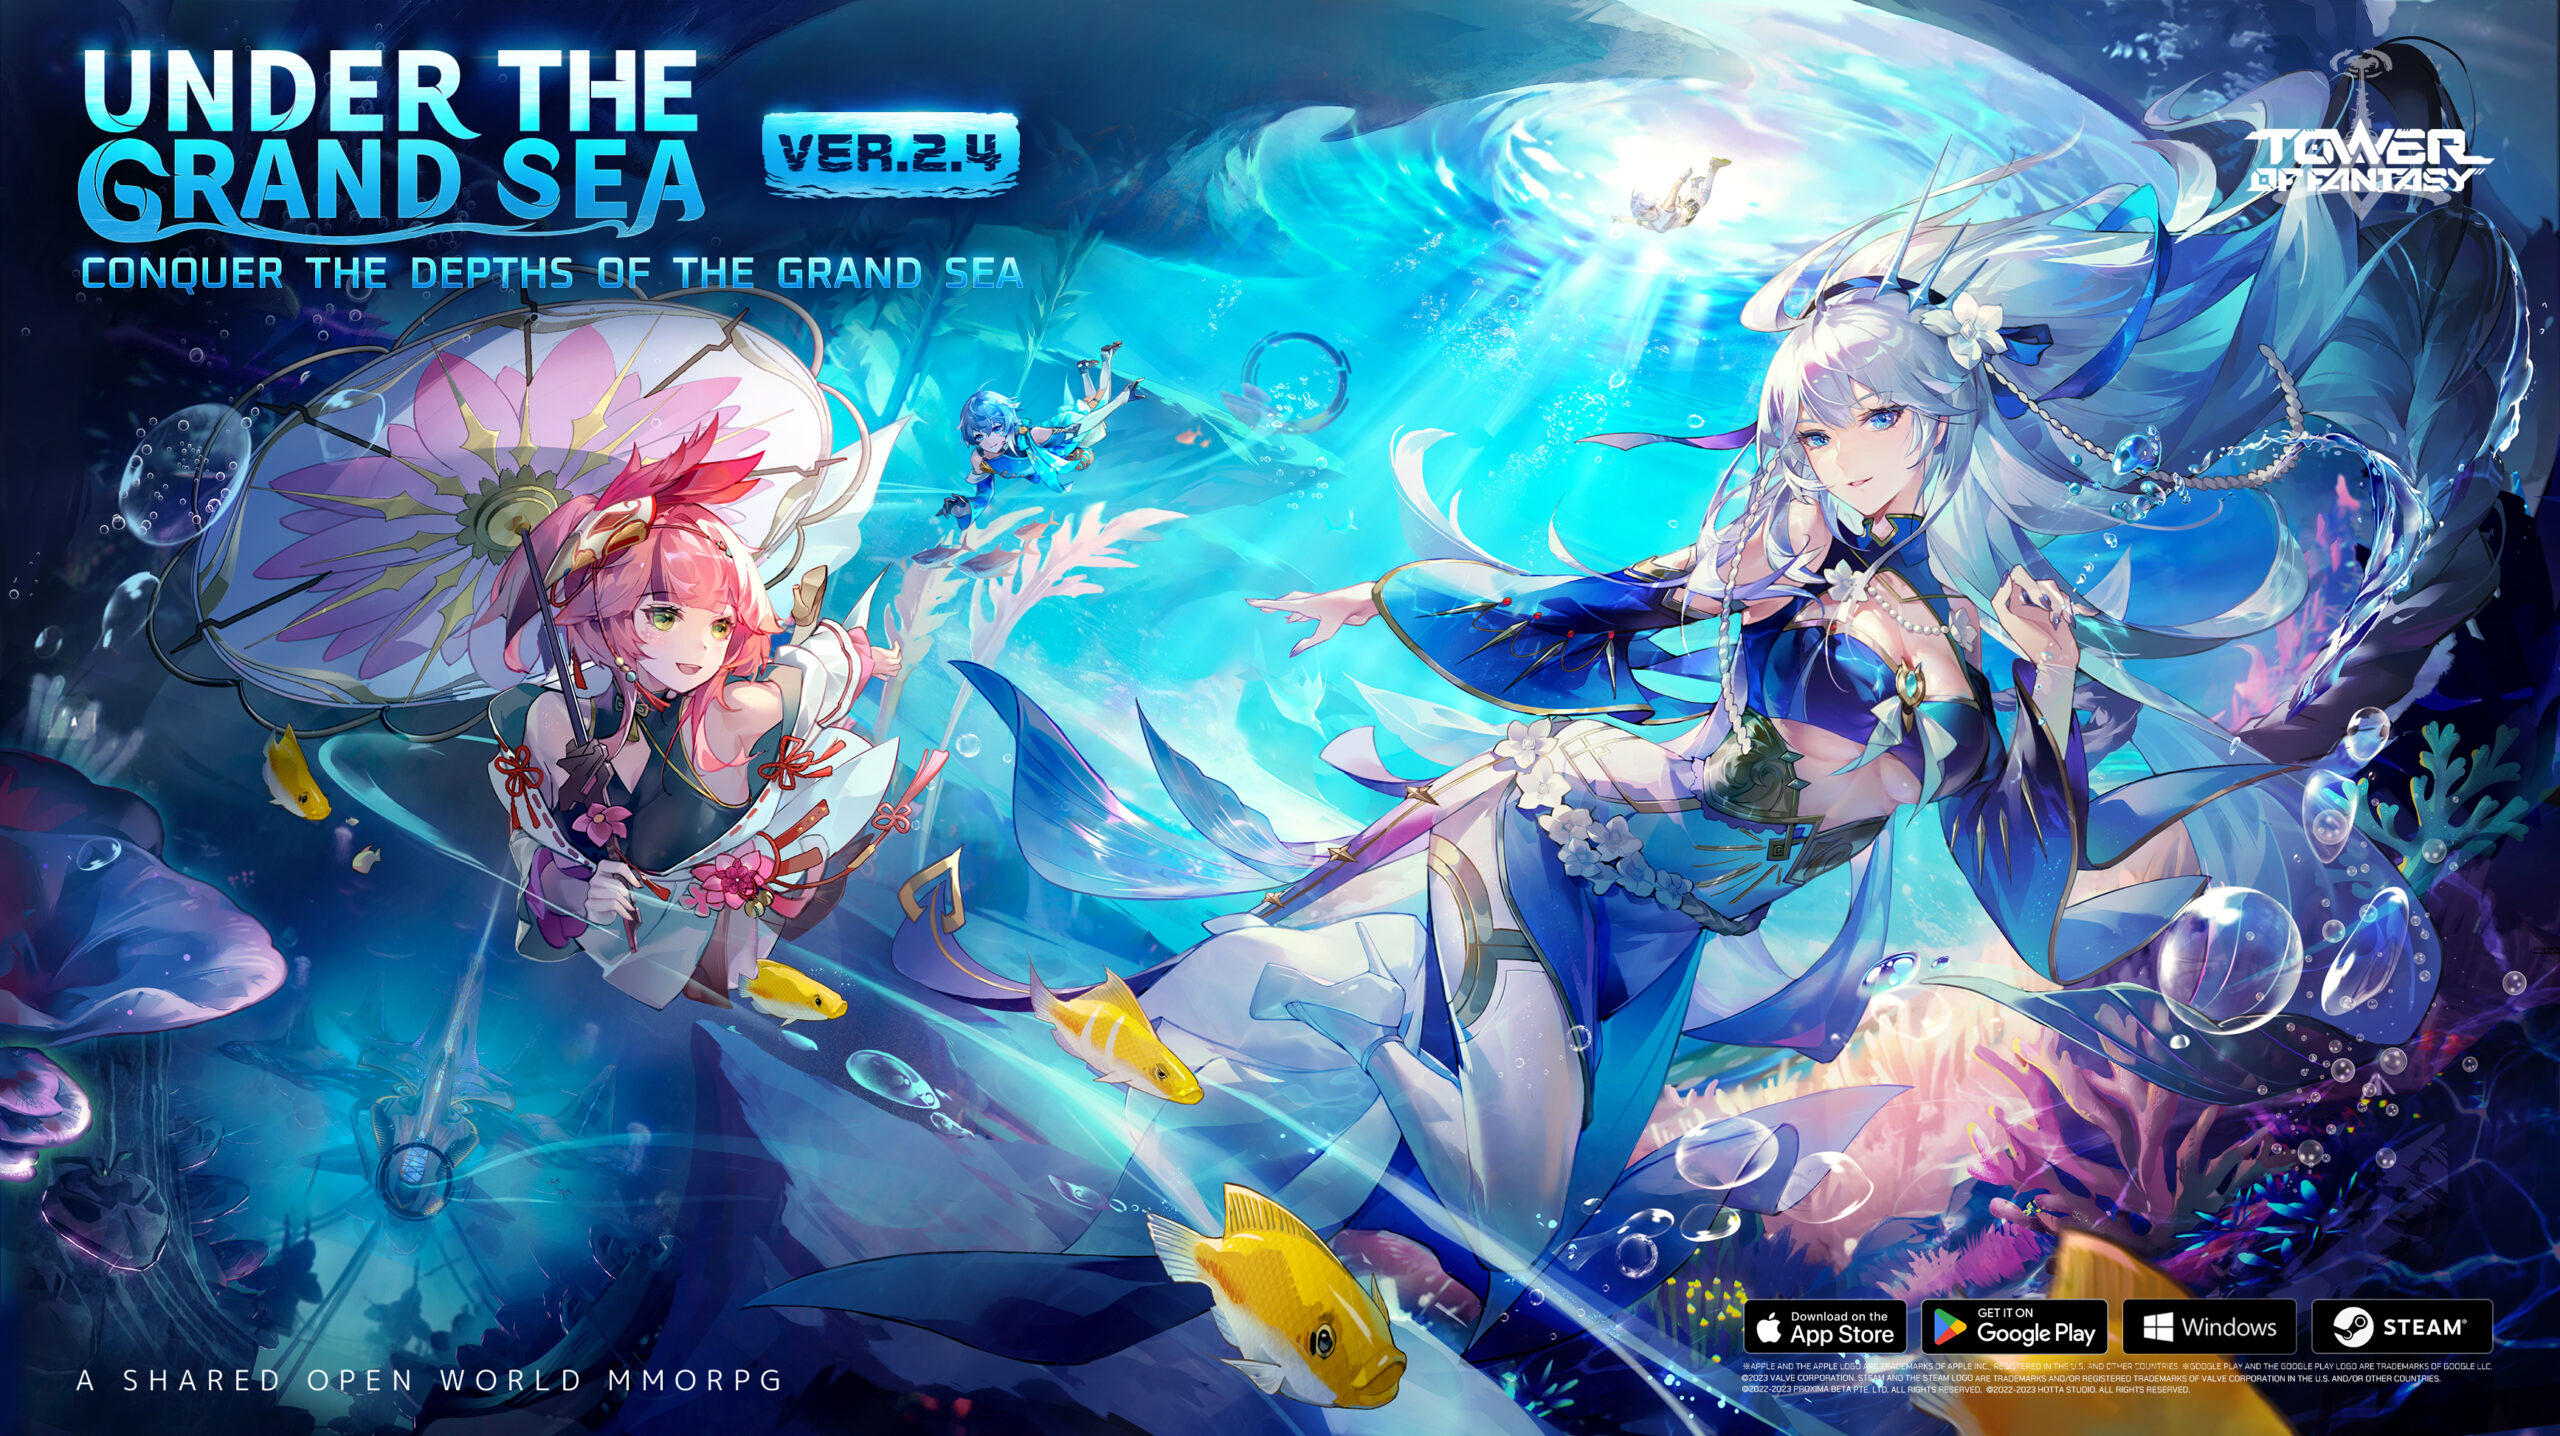 Tower of Fantasy Version 2.4: Under the Grand Sea Launches Soon